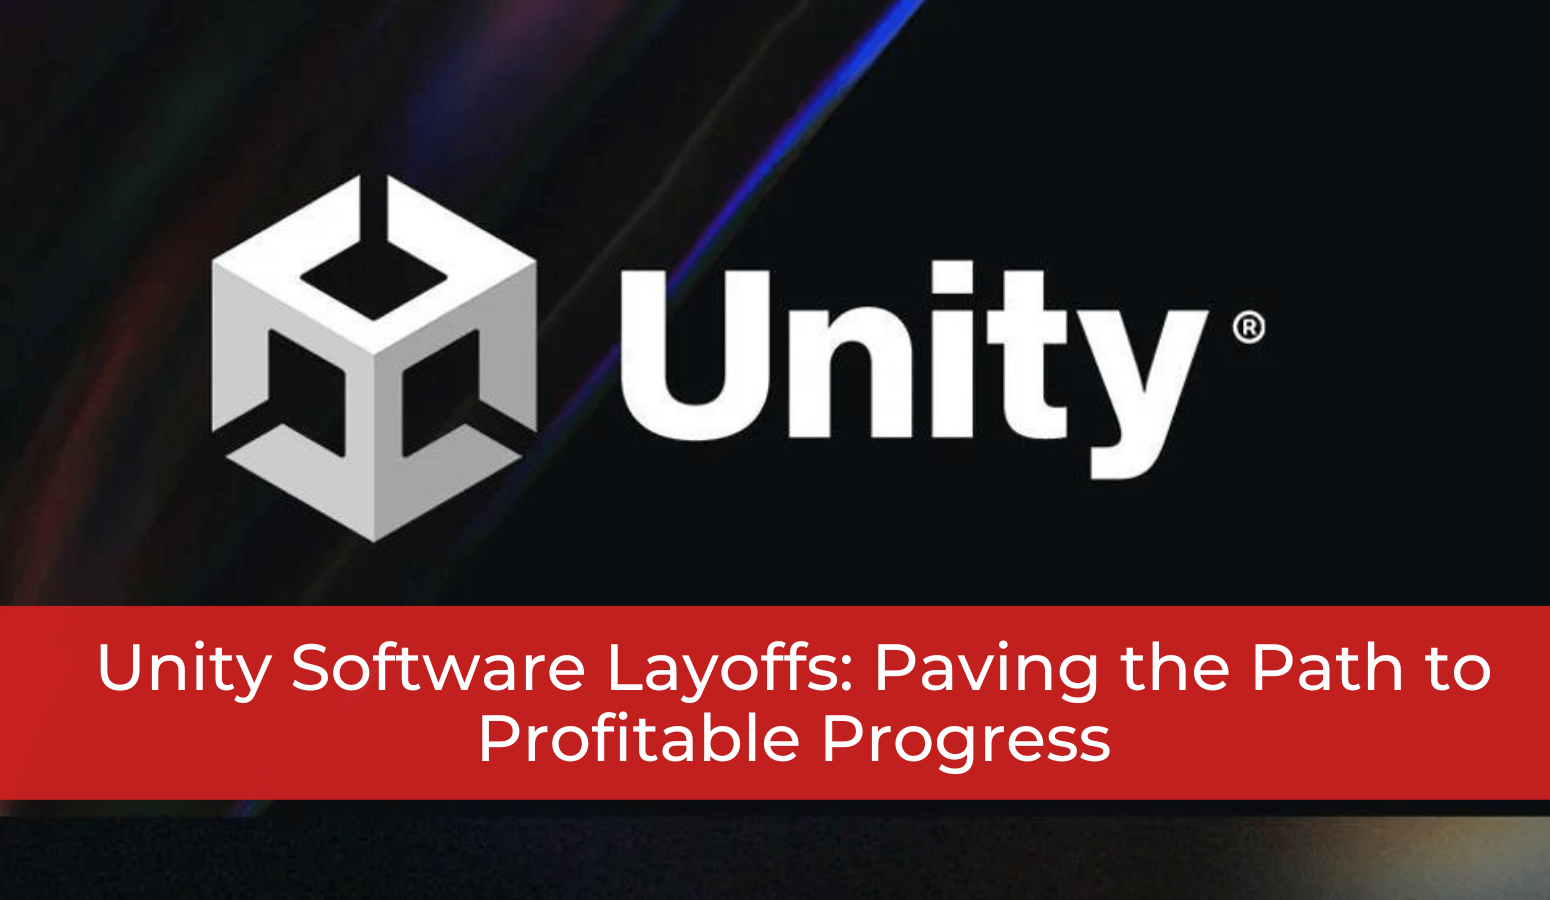 Featured image for “Unity Software Layoffs: Paving the Path to Profitable Progress”